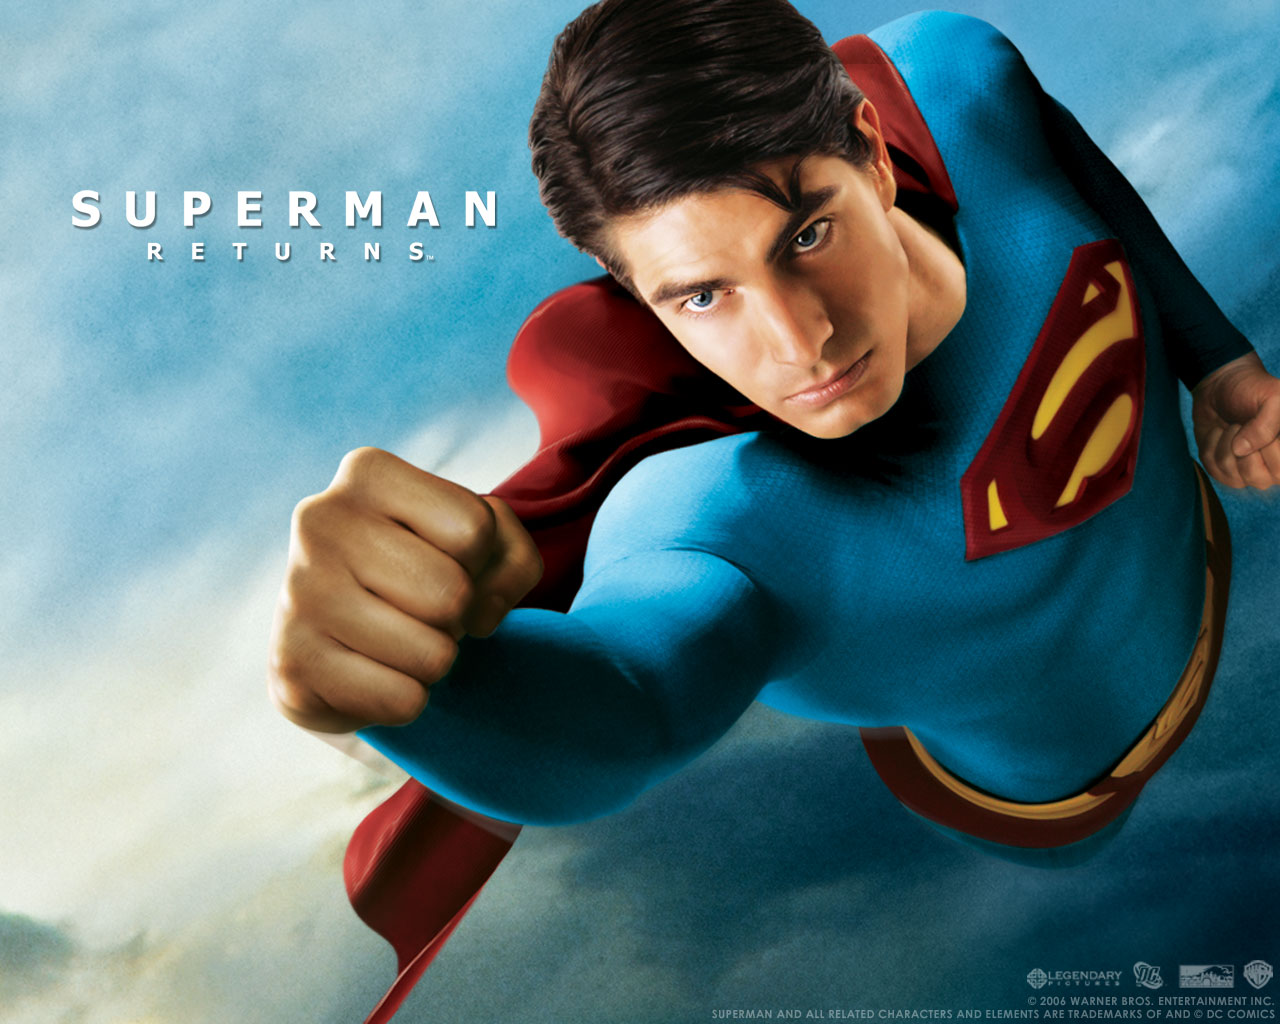 A New Appreciation of Bryan Singer's Superman Returns – We Minored in Film